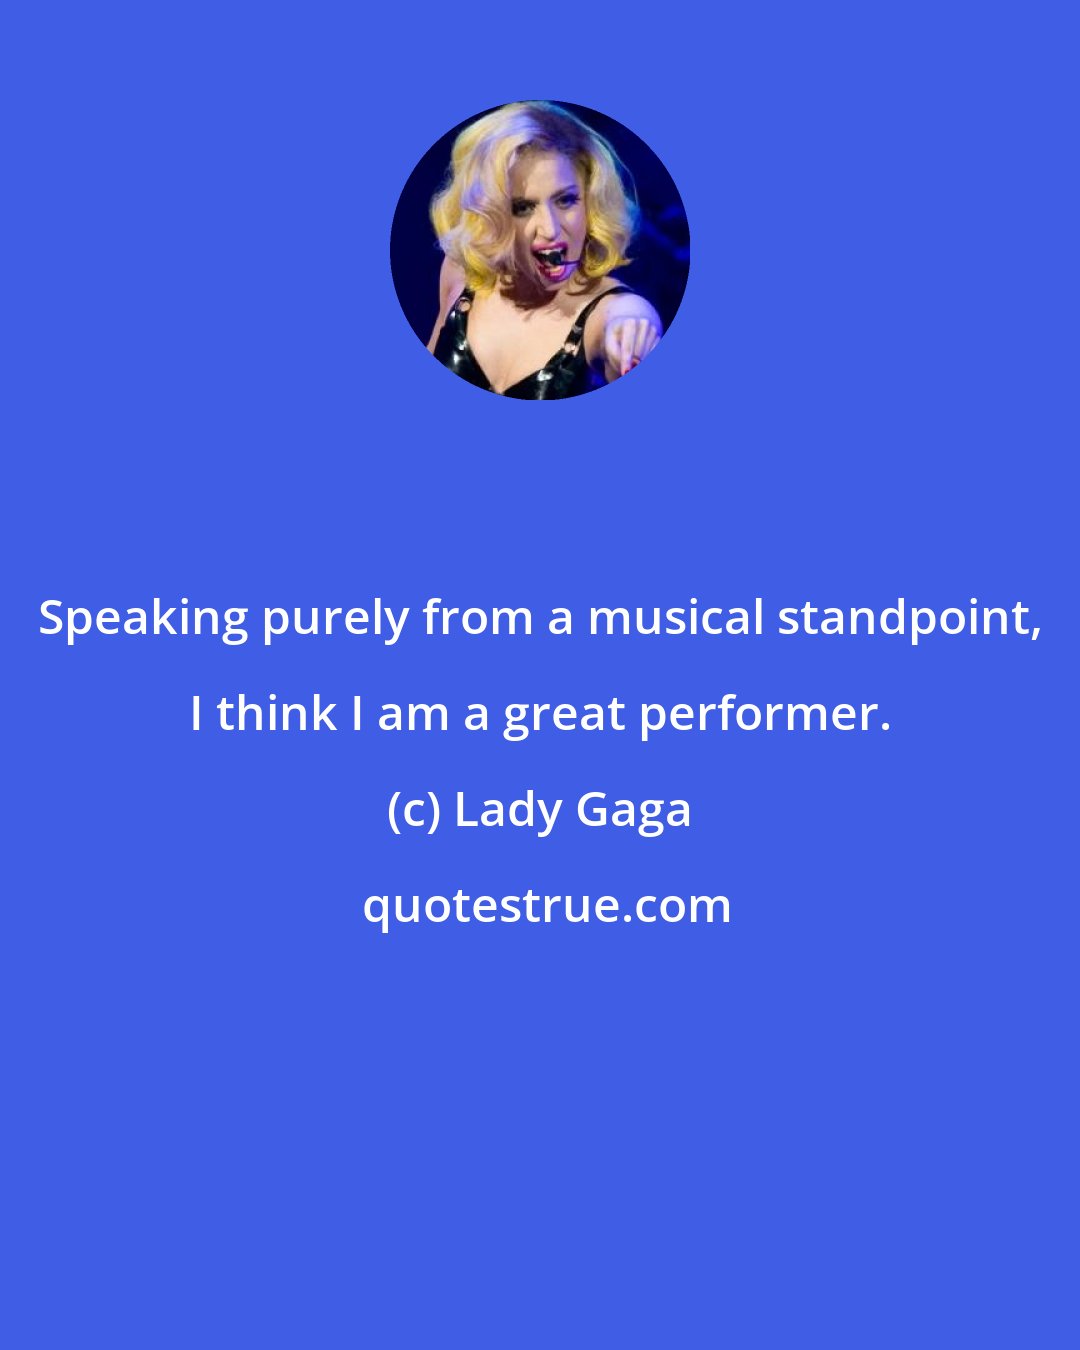 Lady Gaga: Speaking purely from a musical standpoint, I think I am a great performer.